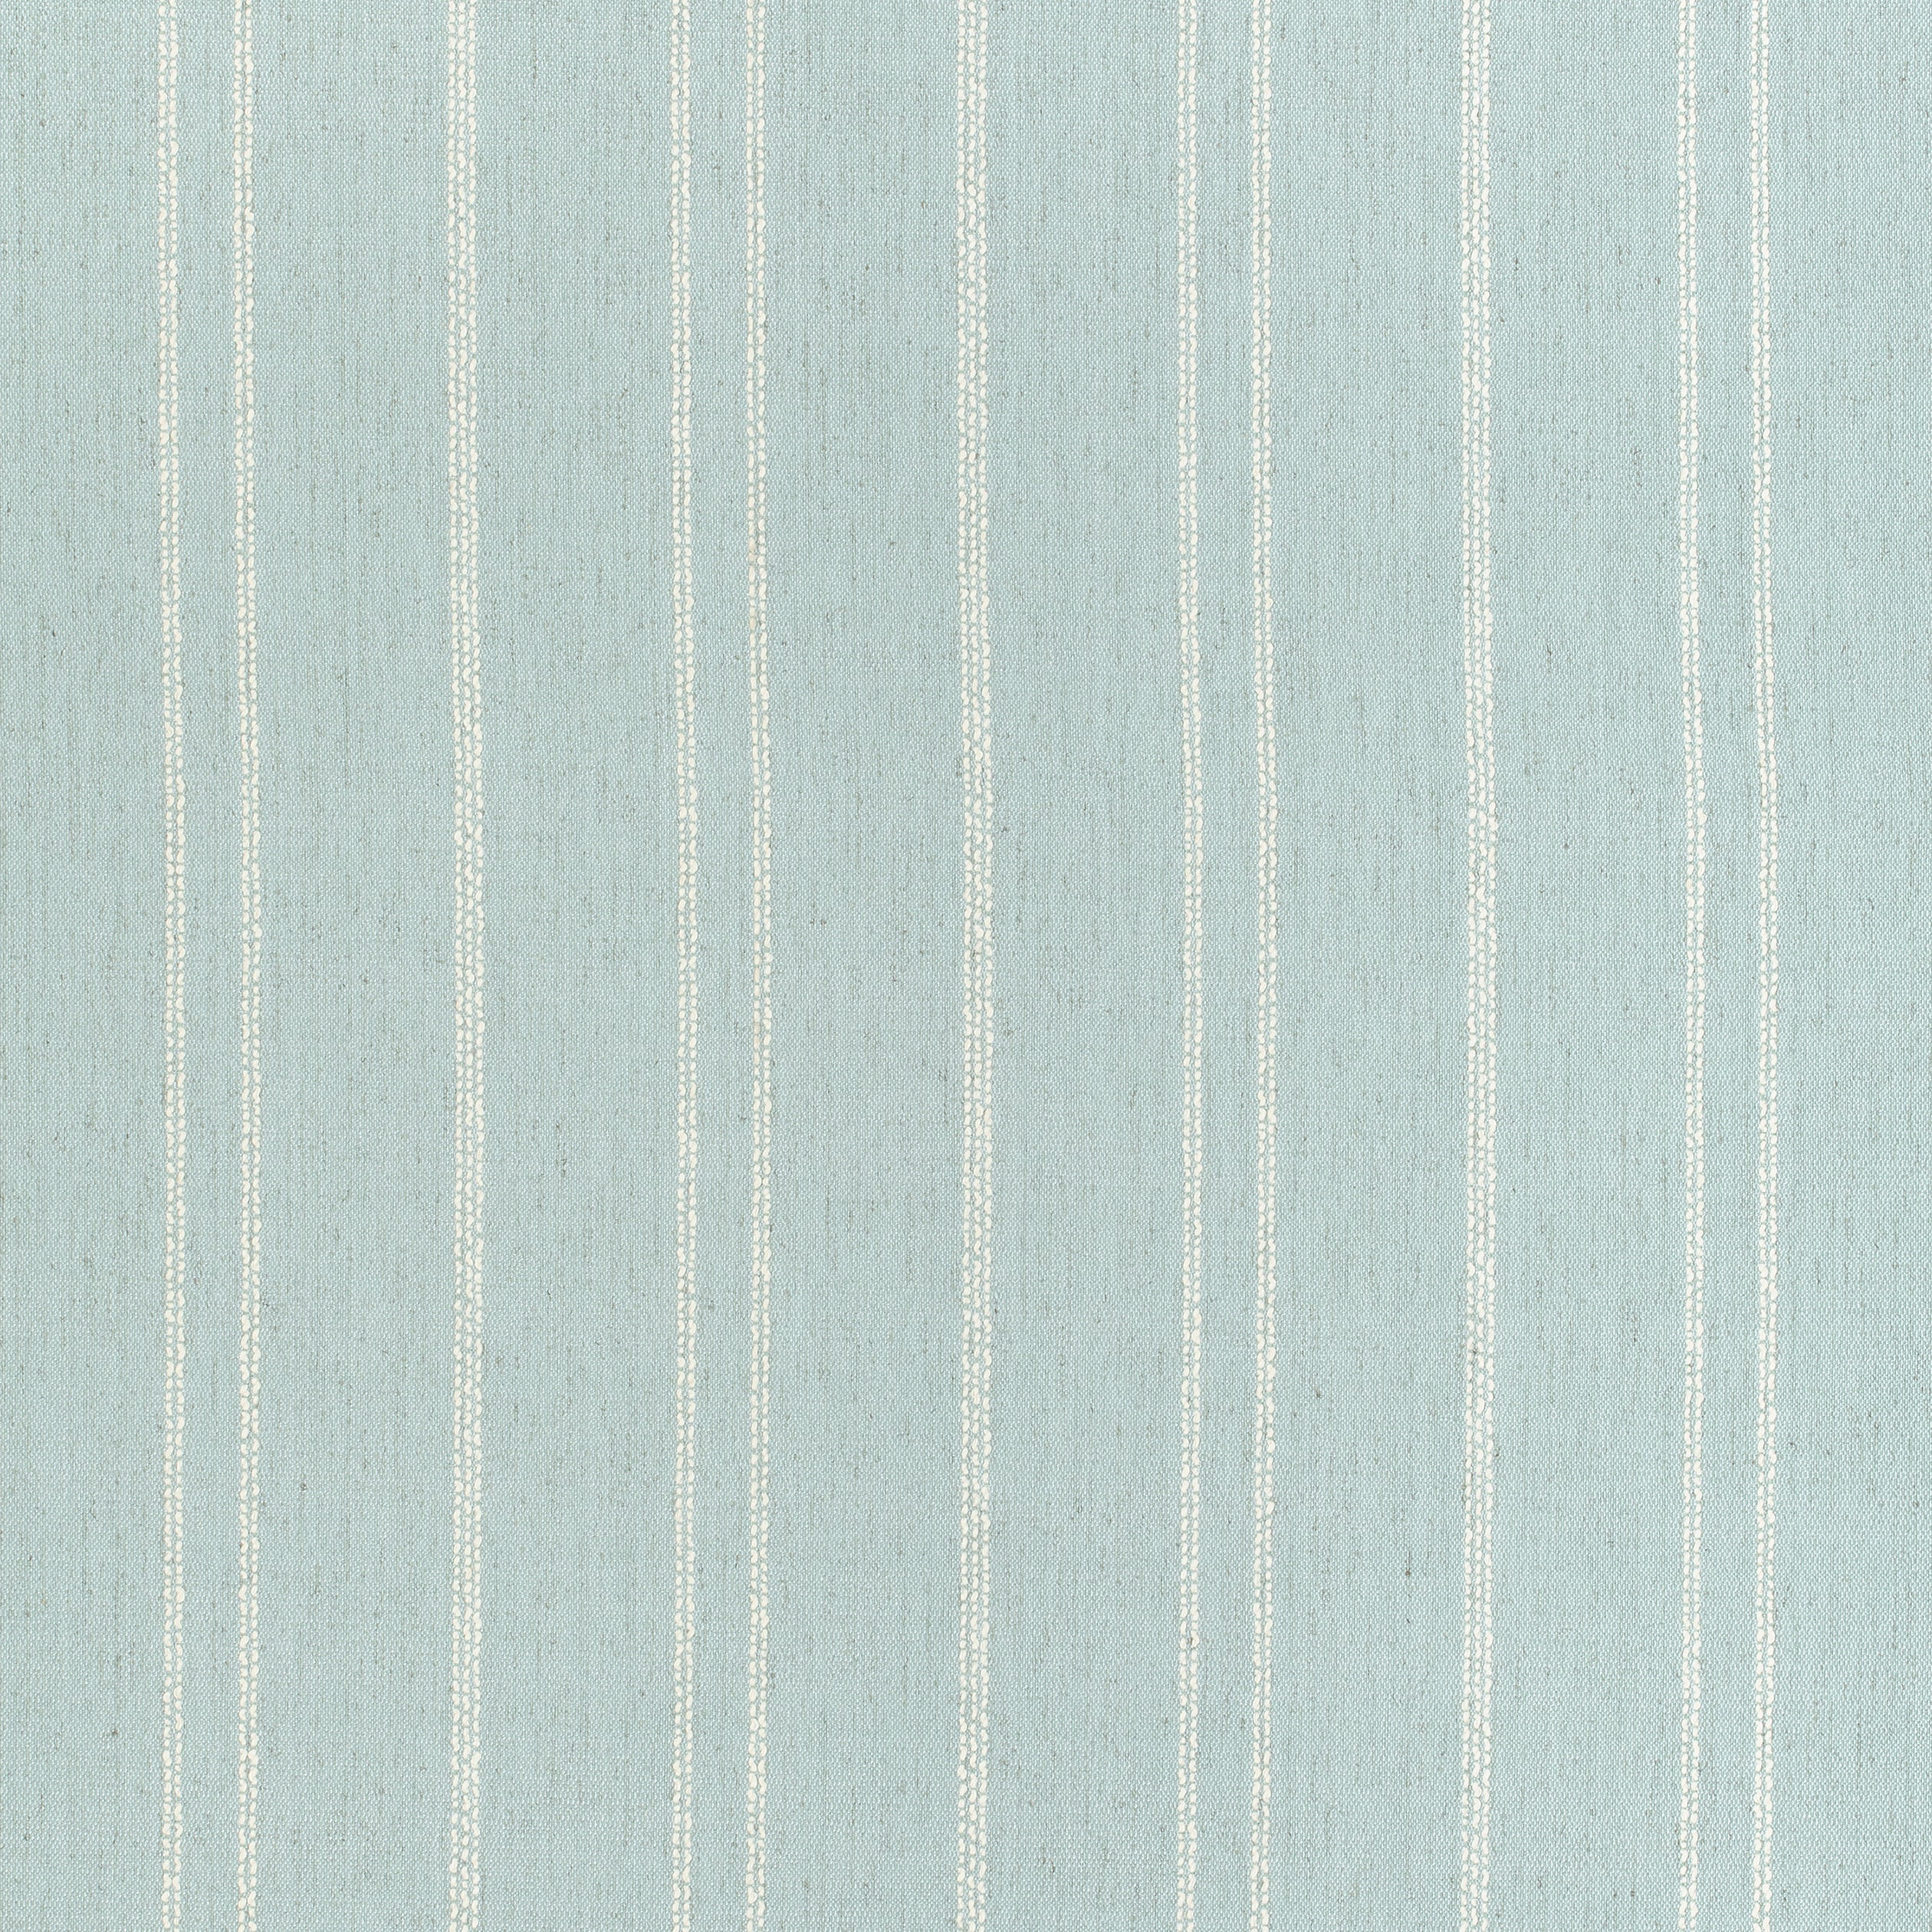 Nolan Stripe fabric in seamist color - pattern number W73310 - by Thibaut in the Nomad collection